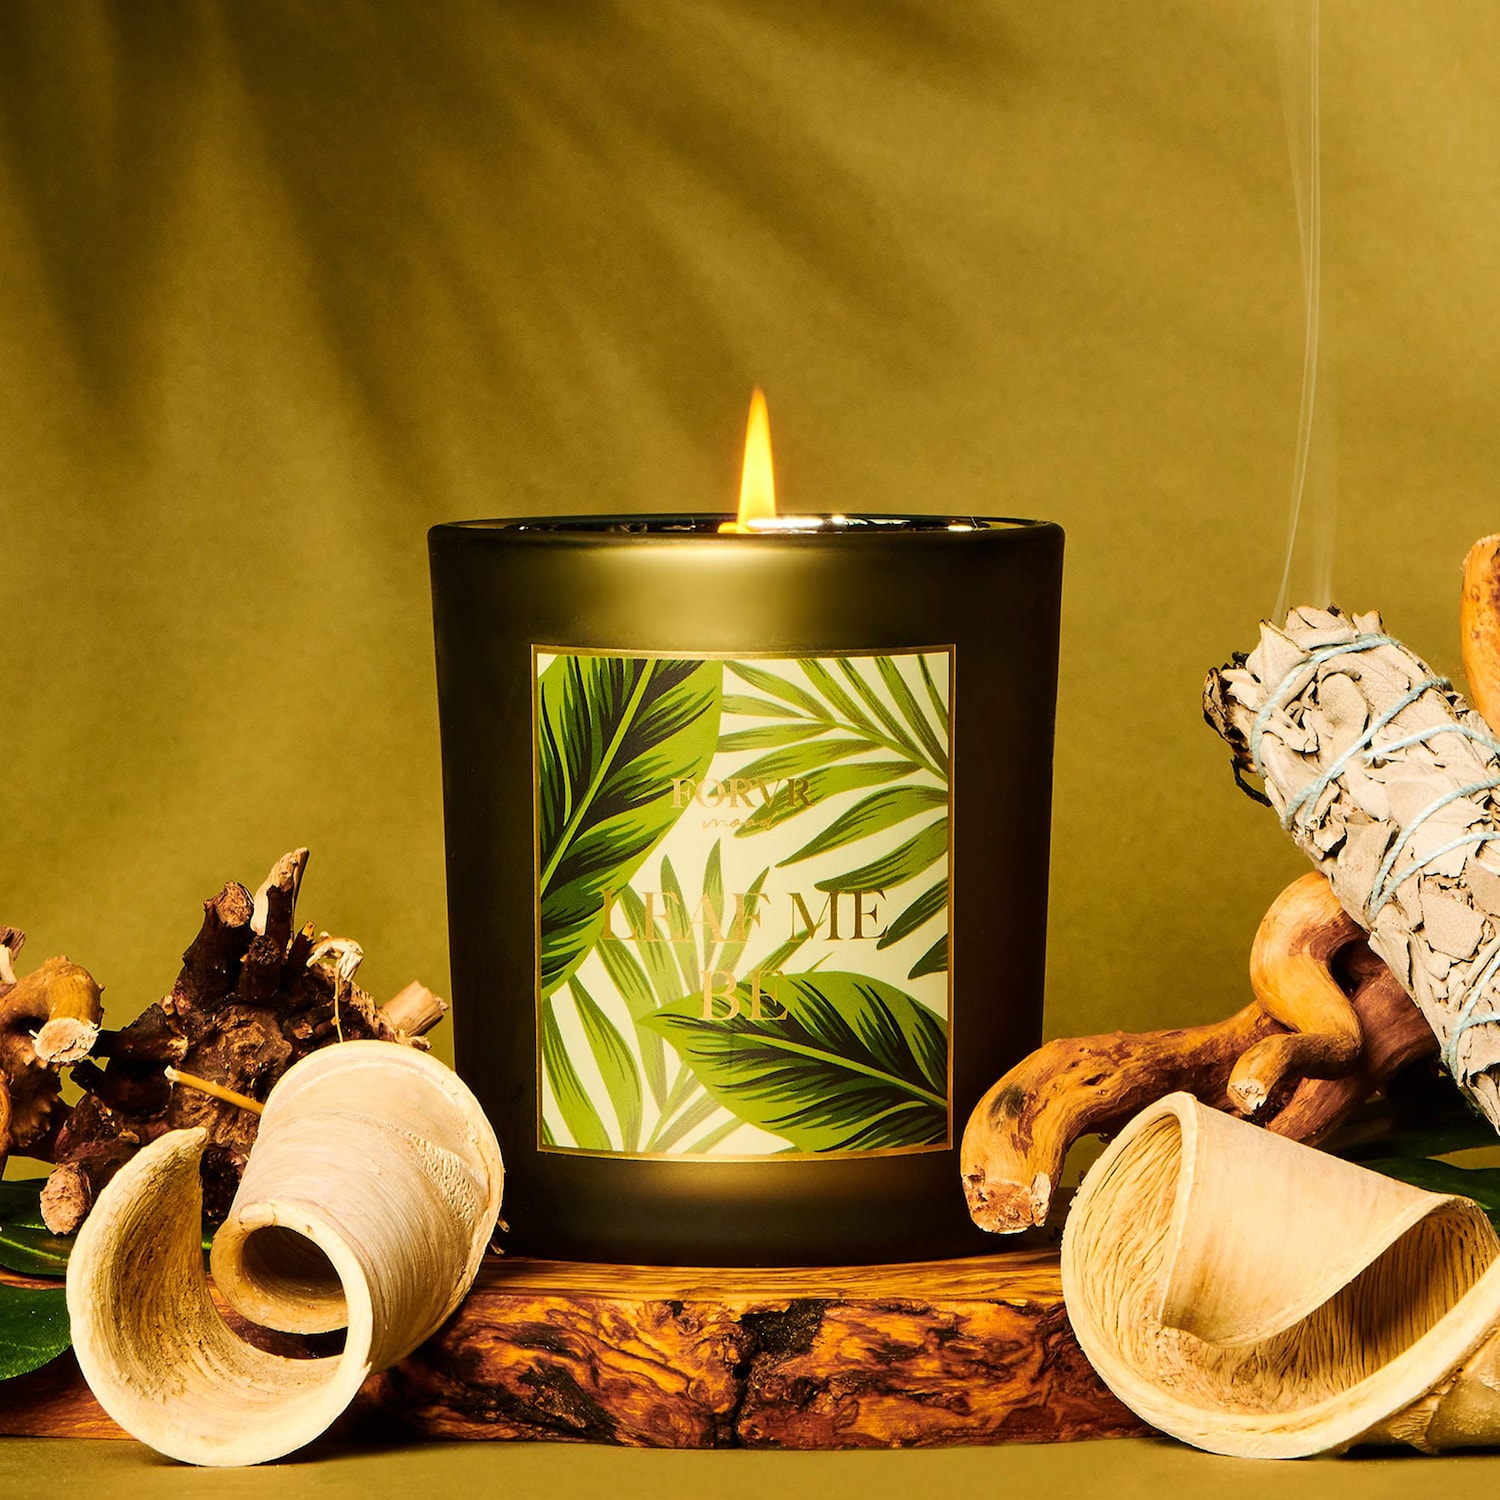 24 horoscope gift ideas to give your loved one. Pictured: a candle